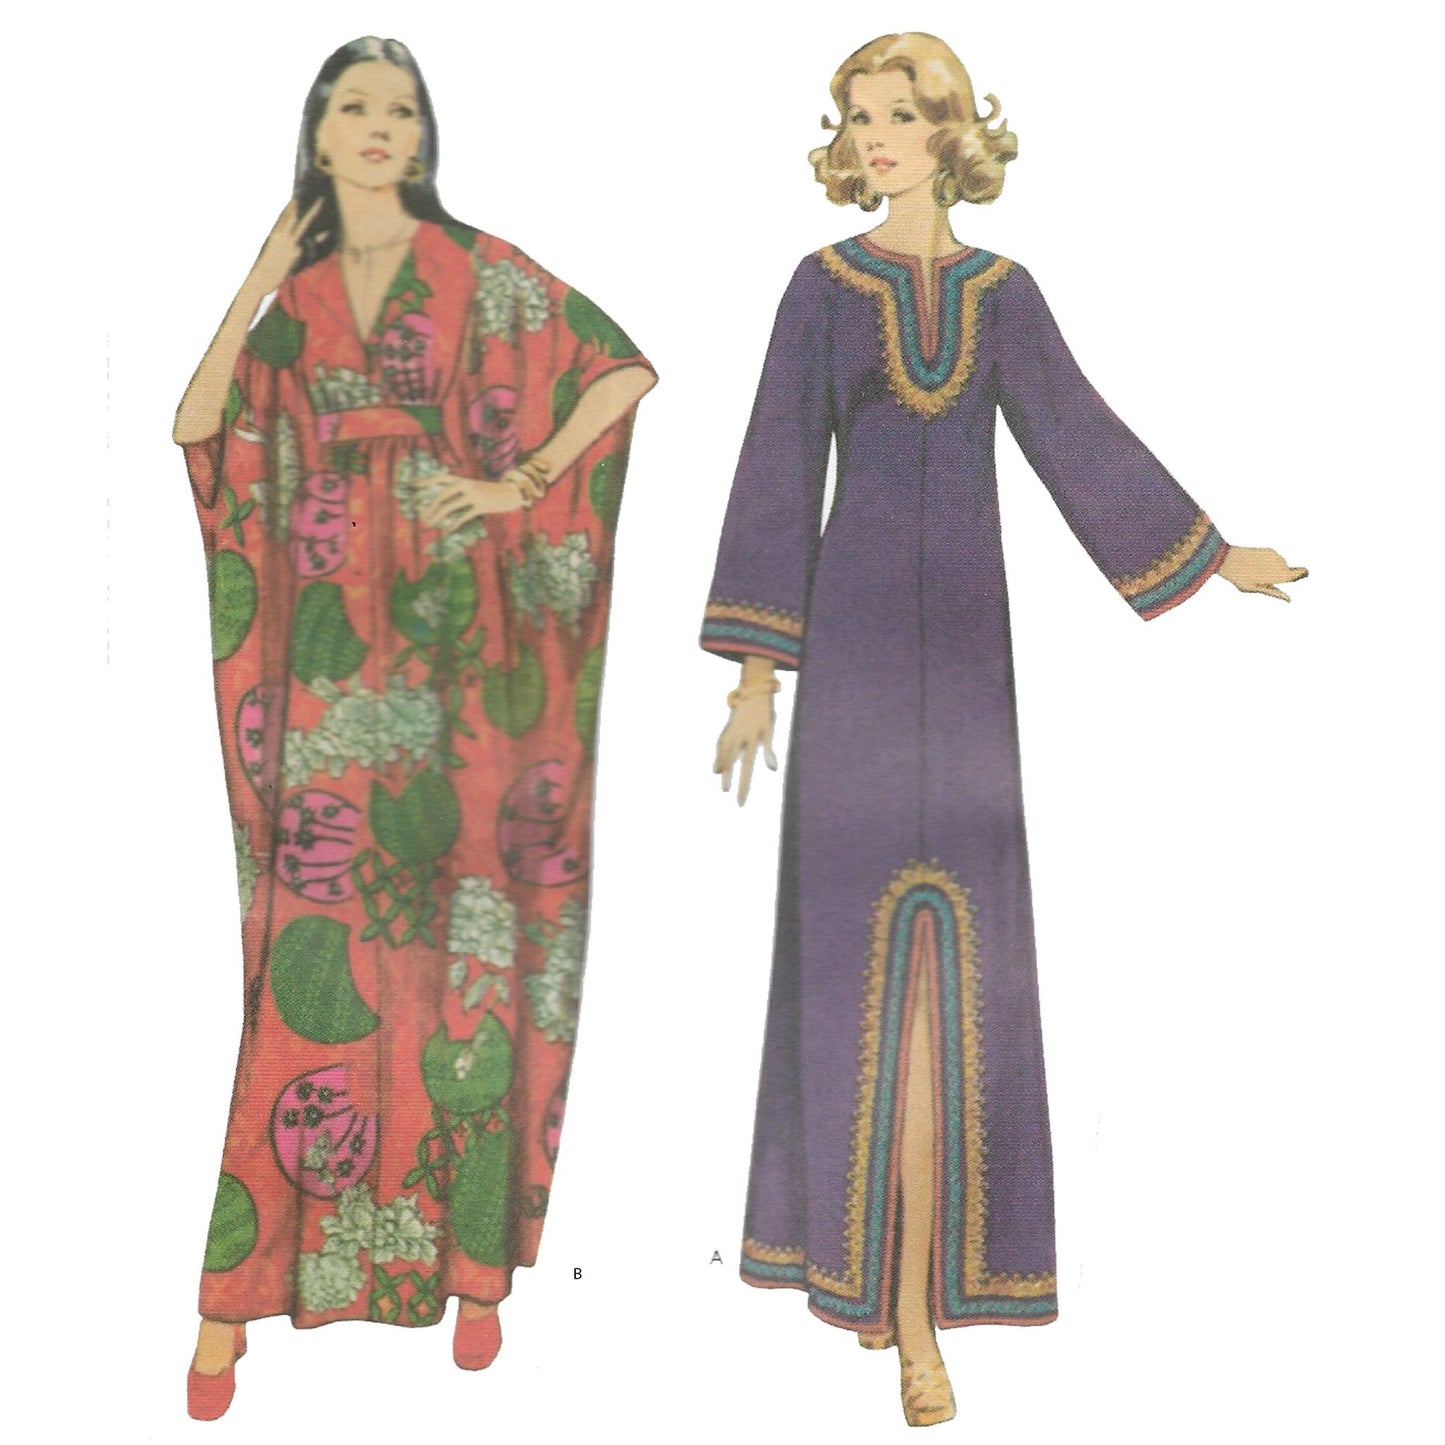 Model wearing 1970s caftans made from Simplicity 8505 pattern